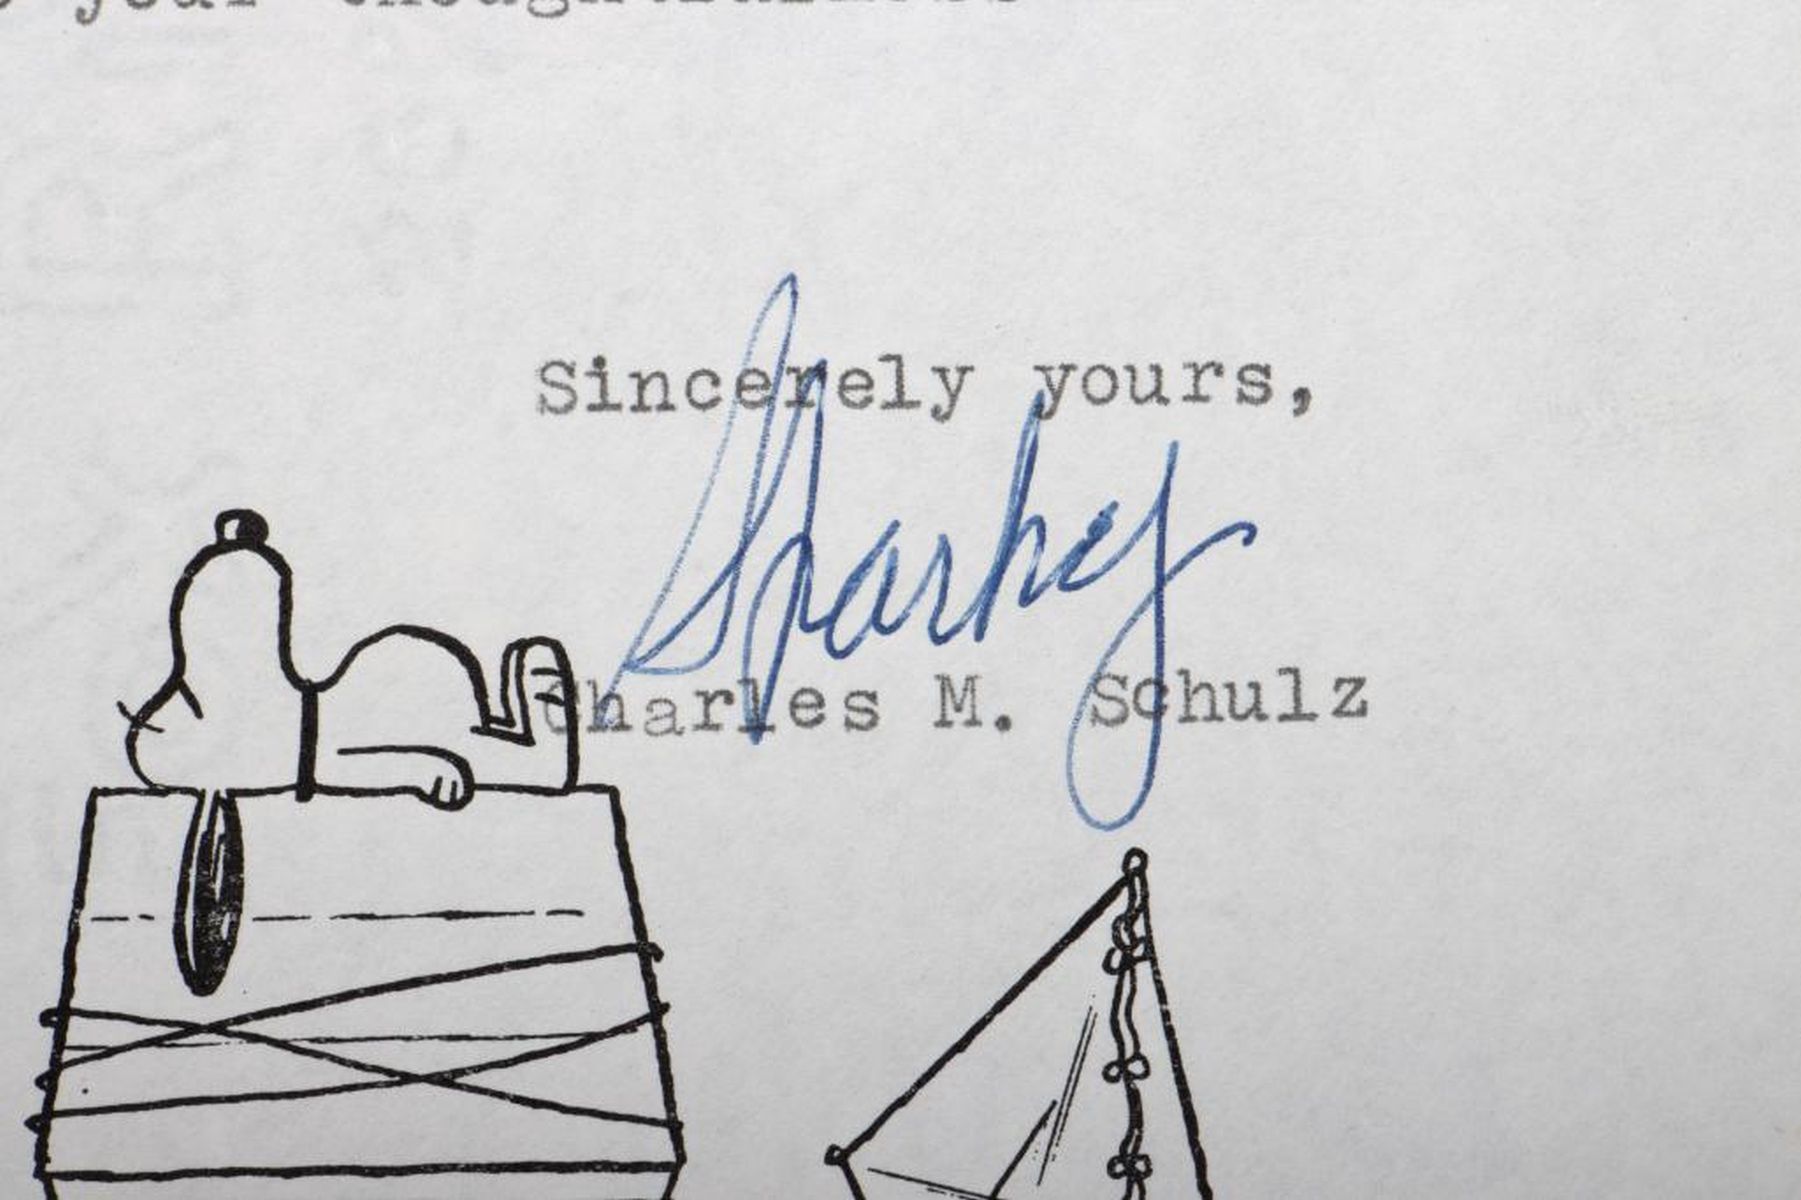 Charles M. Schulz Autographed Letter - Image 3 of 5